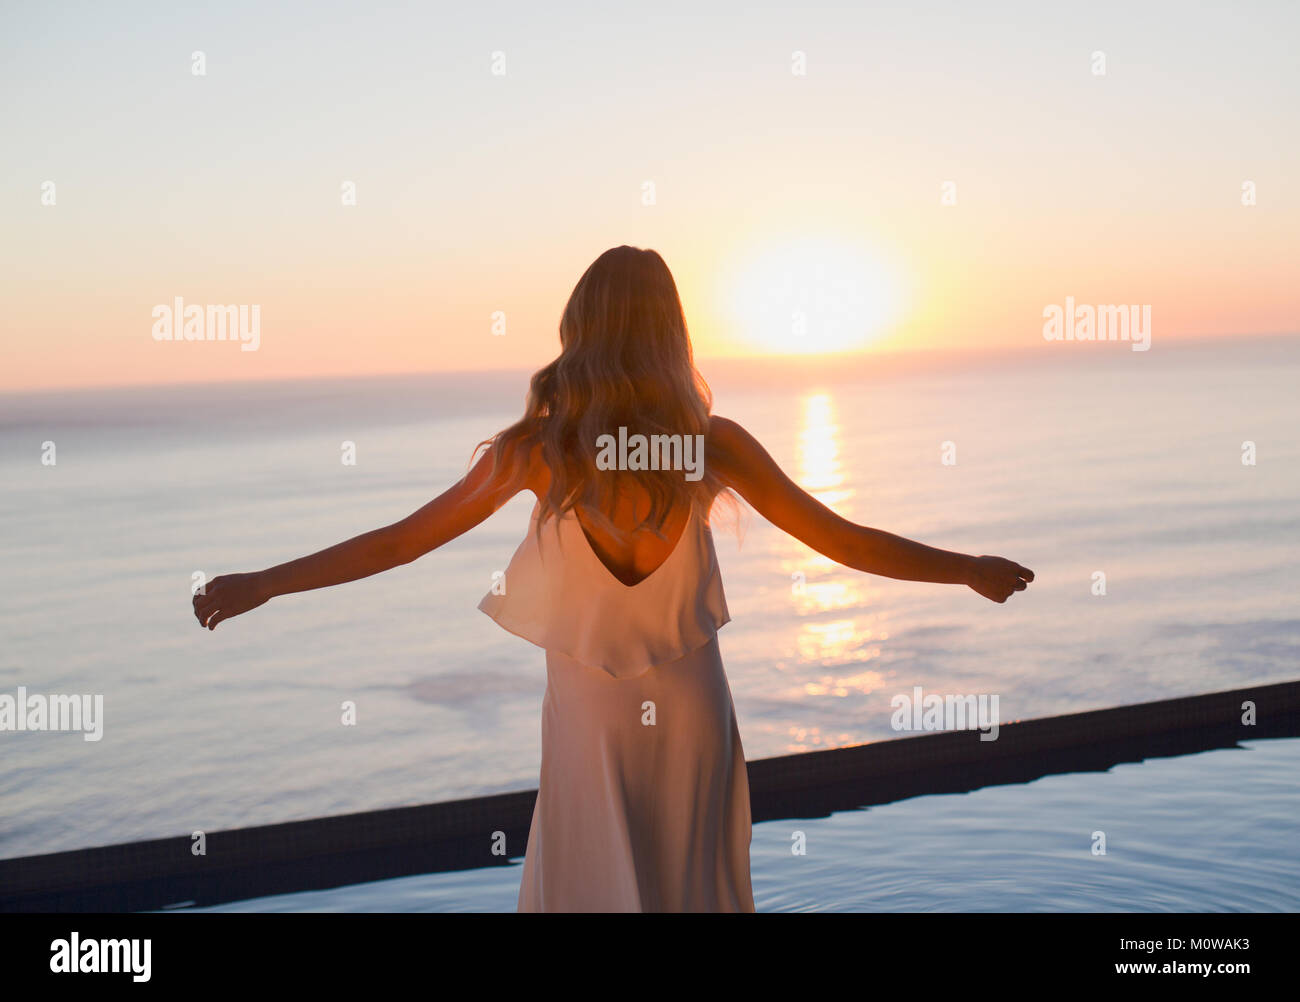 Woman with arms outstretched watching tranquil sunset view over ocean horizon Stock Photo